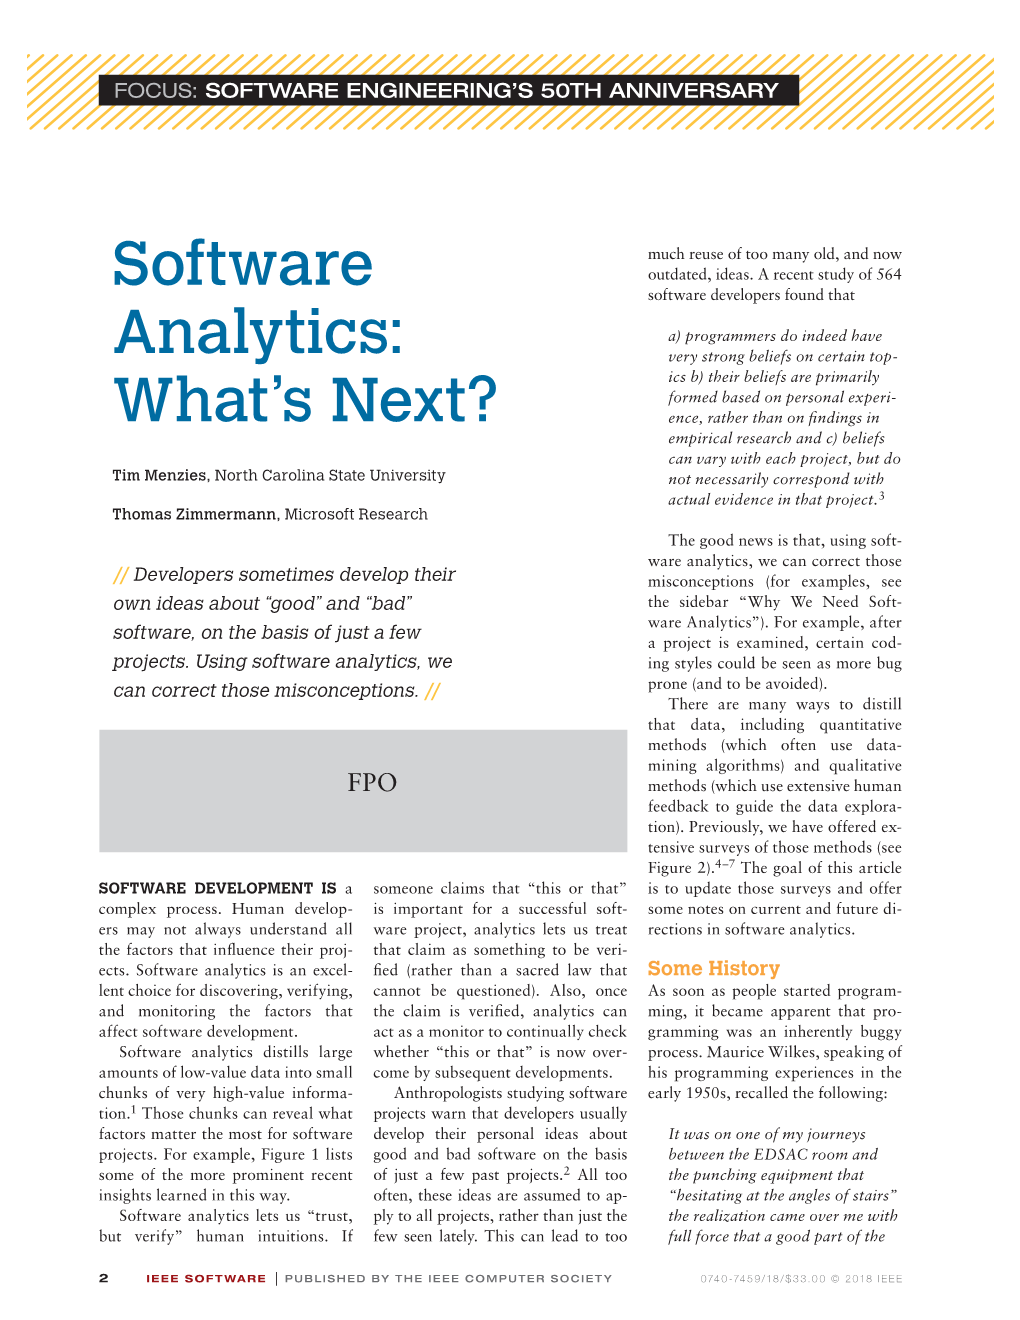 Software Analytics, We Ing Styles Could Be Seen As More Bug Can Correct Those Misconceptions